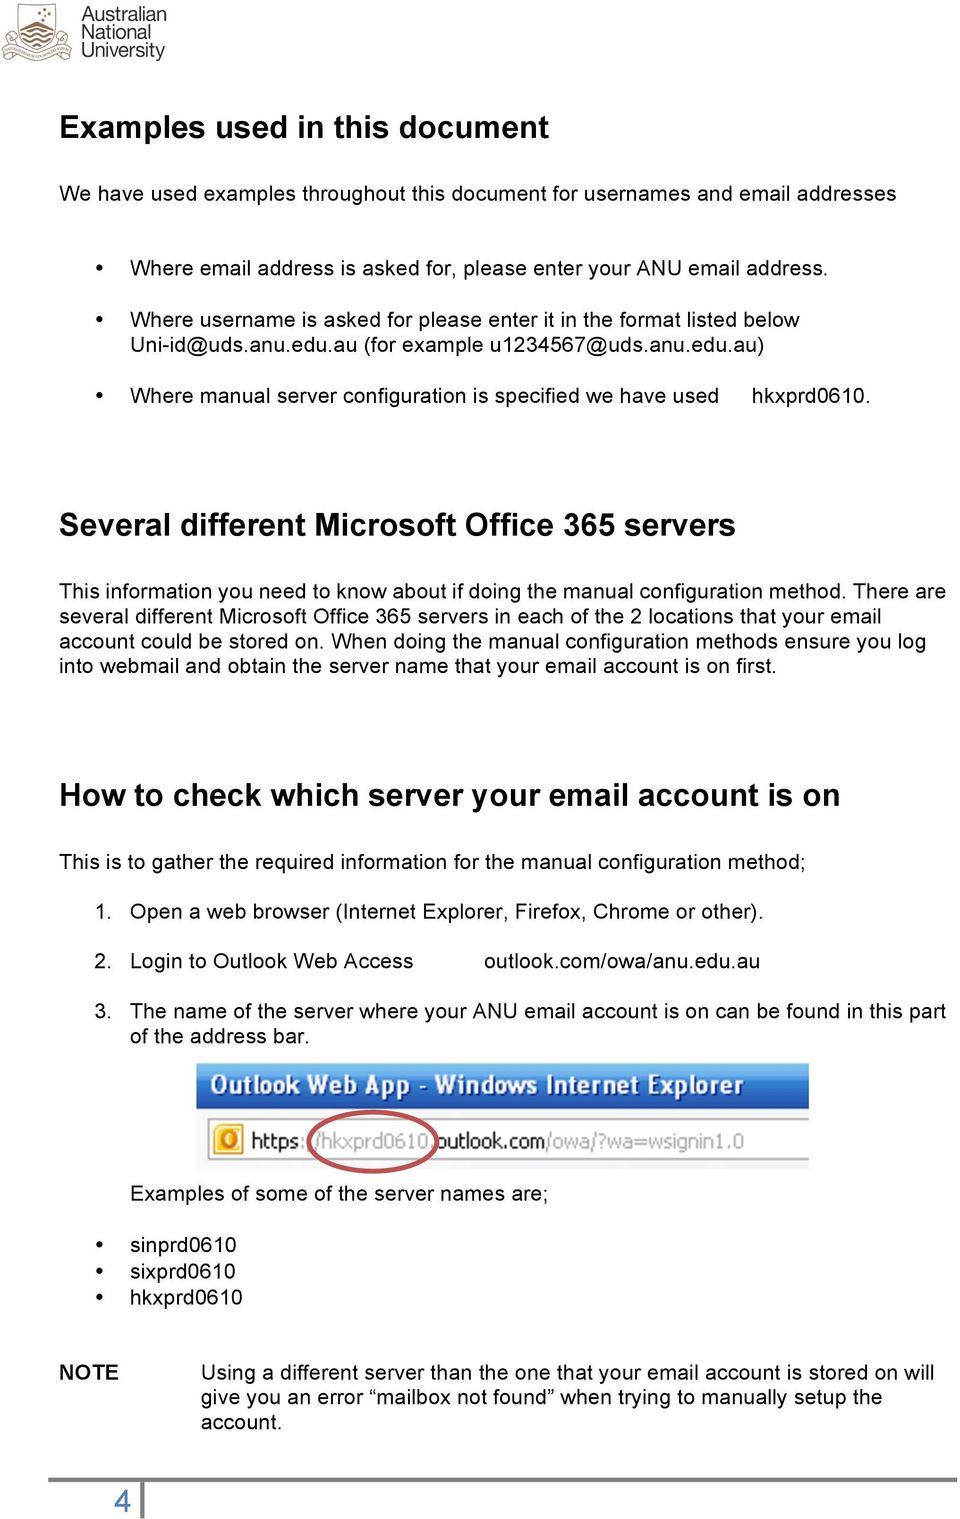 Several different Microsoft Office 365 servers This information you need to know about if doing the manual configuration method.